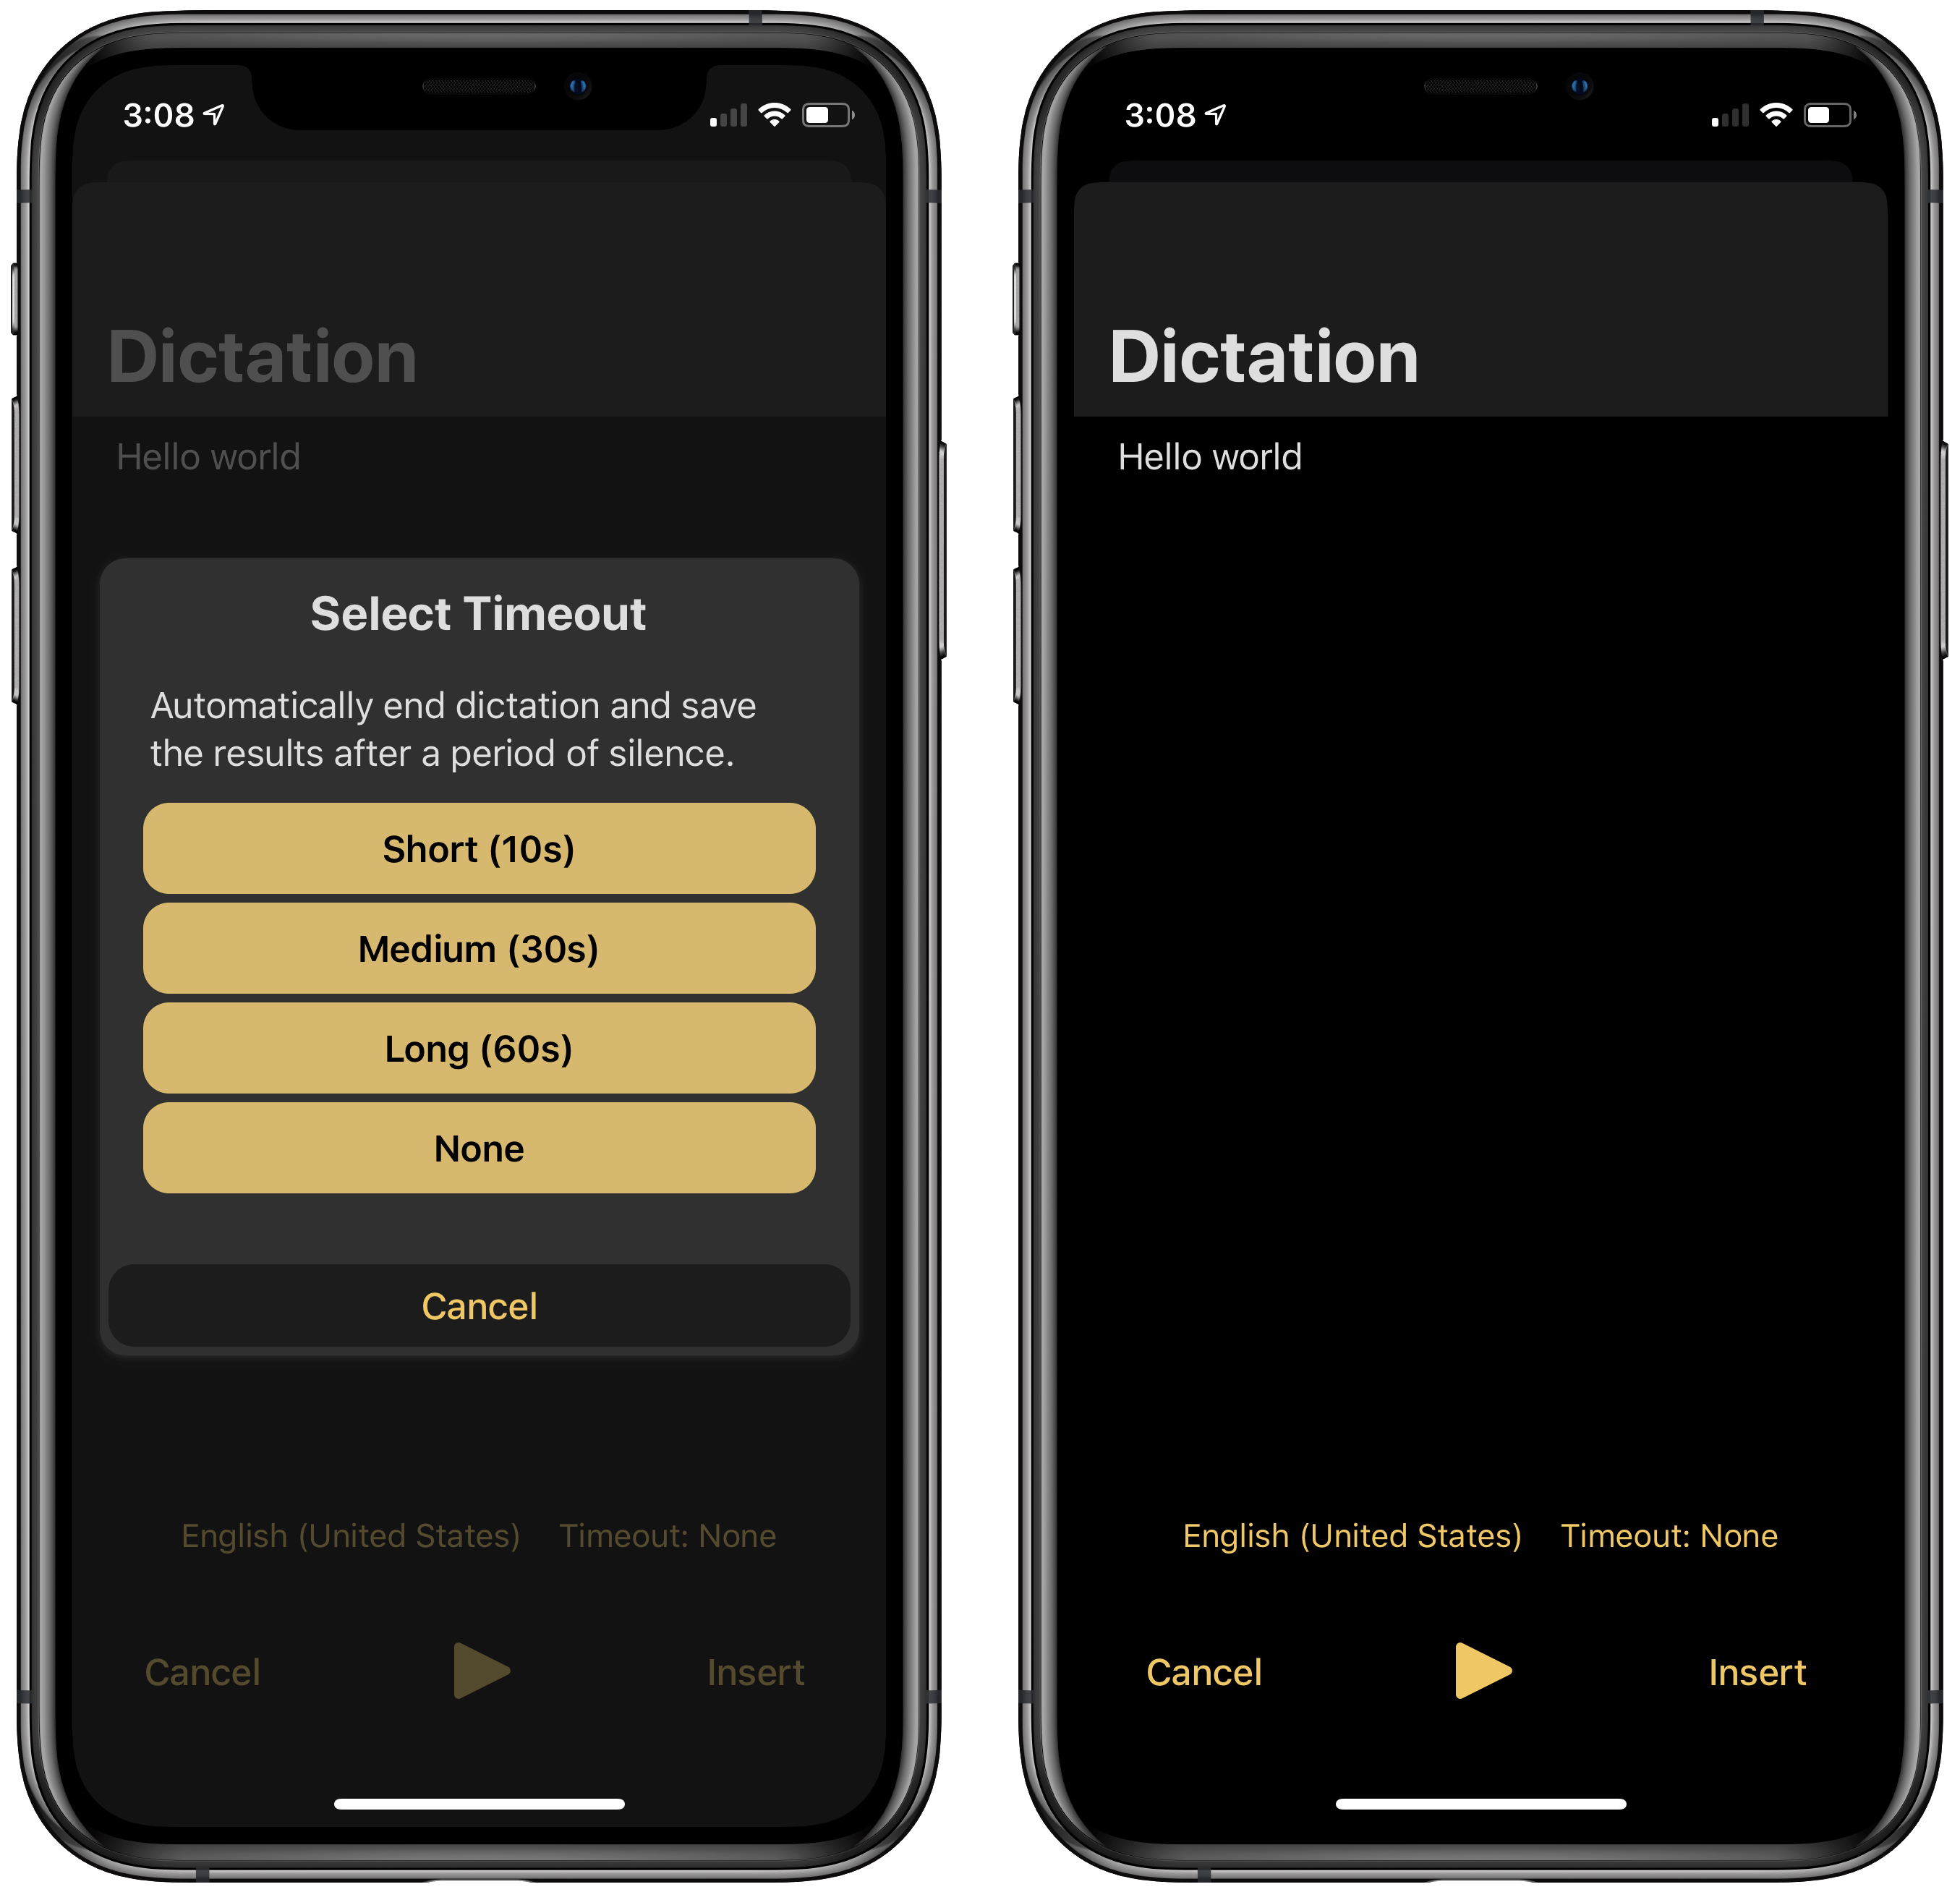 The dictation interface of Drafts.